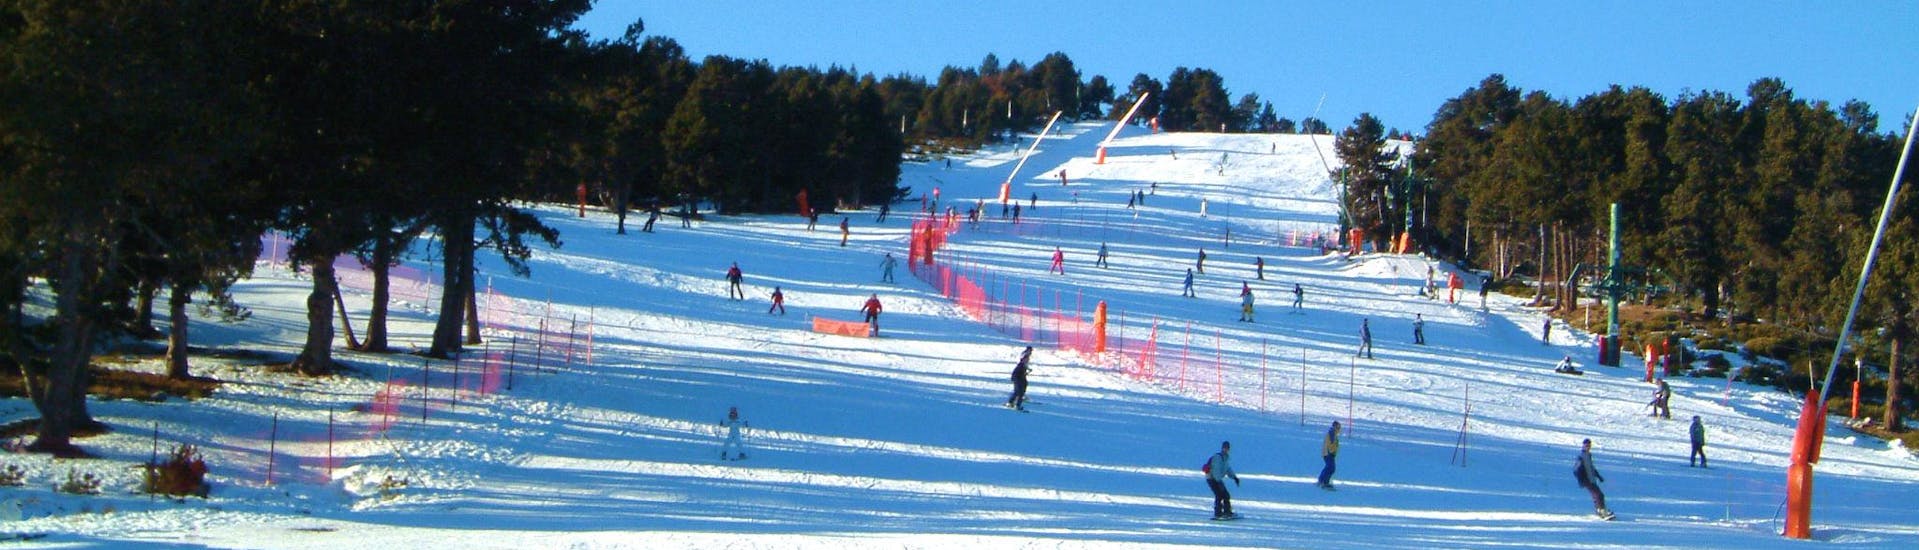 An image of the snow-covered landscape of Font Romeu Pyrénées 2000, where local ski schools offer a wide variety of ski lessons for anyone who wants to learn to ski.